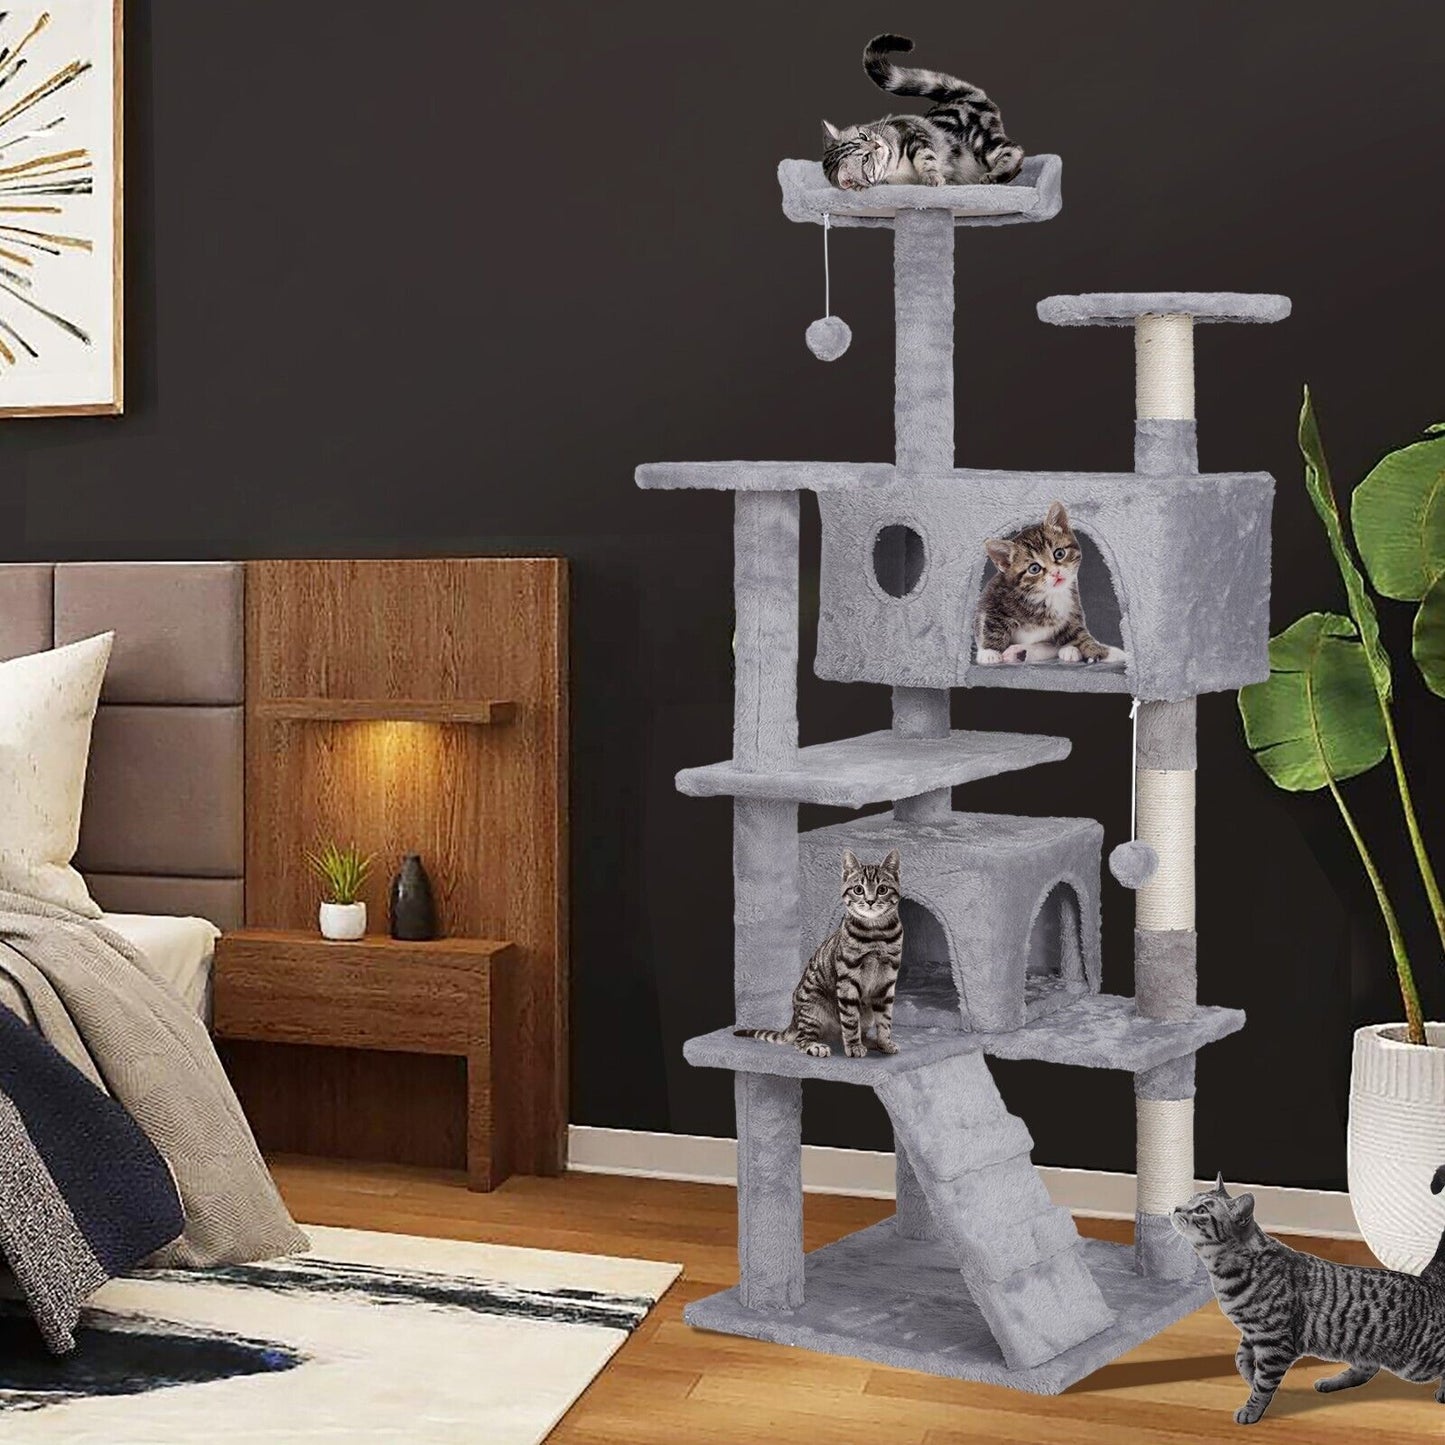 55"Cat Tree Tower Condo Scrathcher Post Activity Center Playing House Light Grey